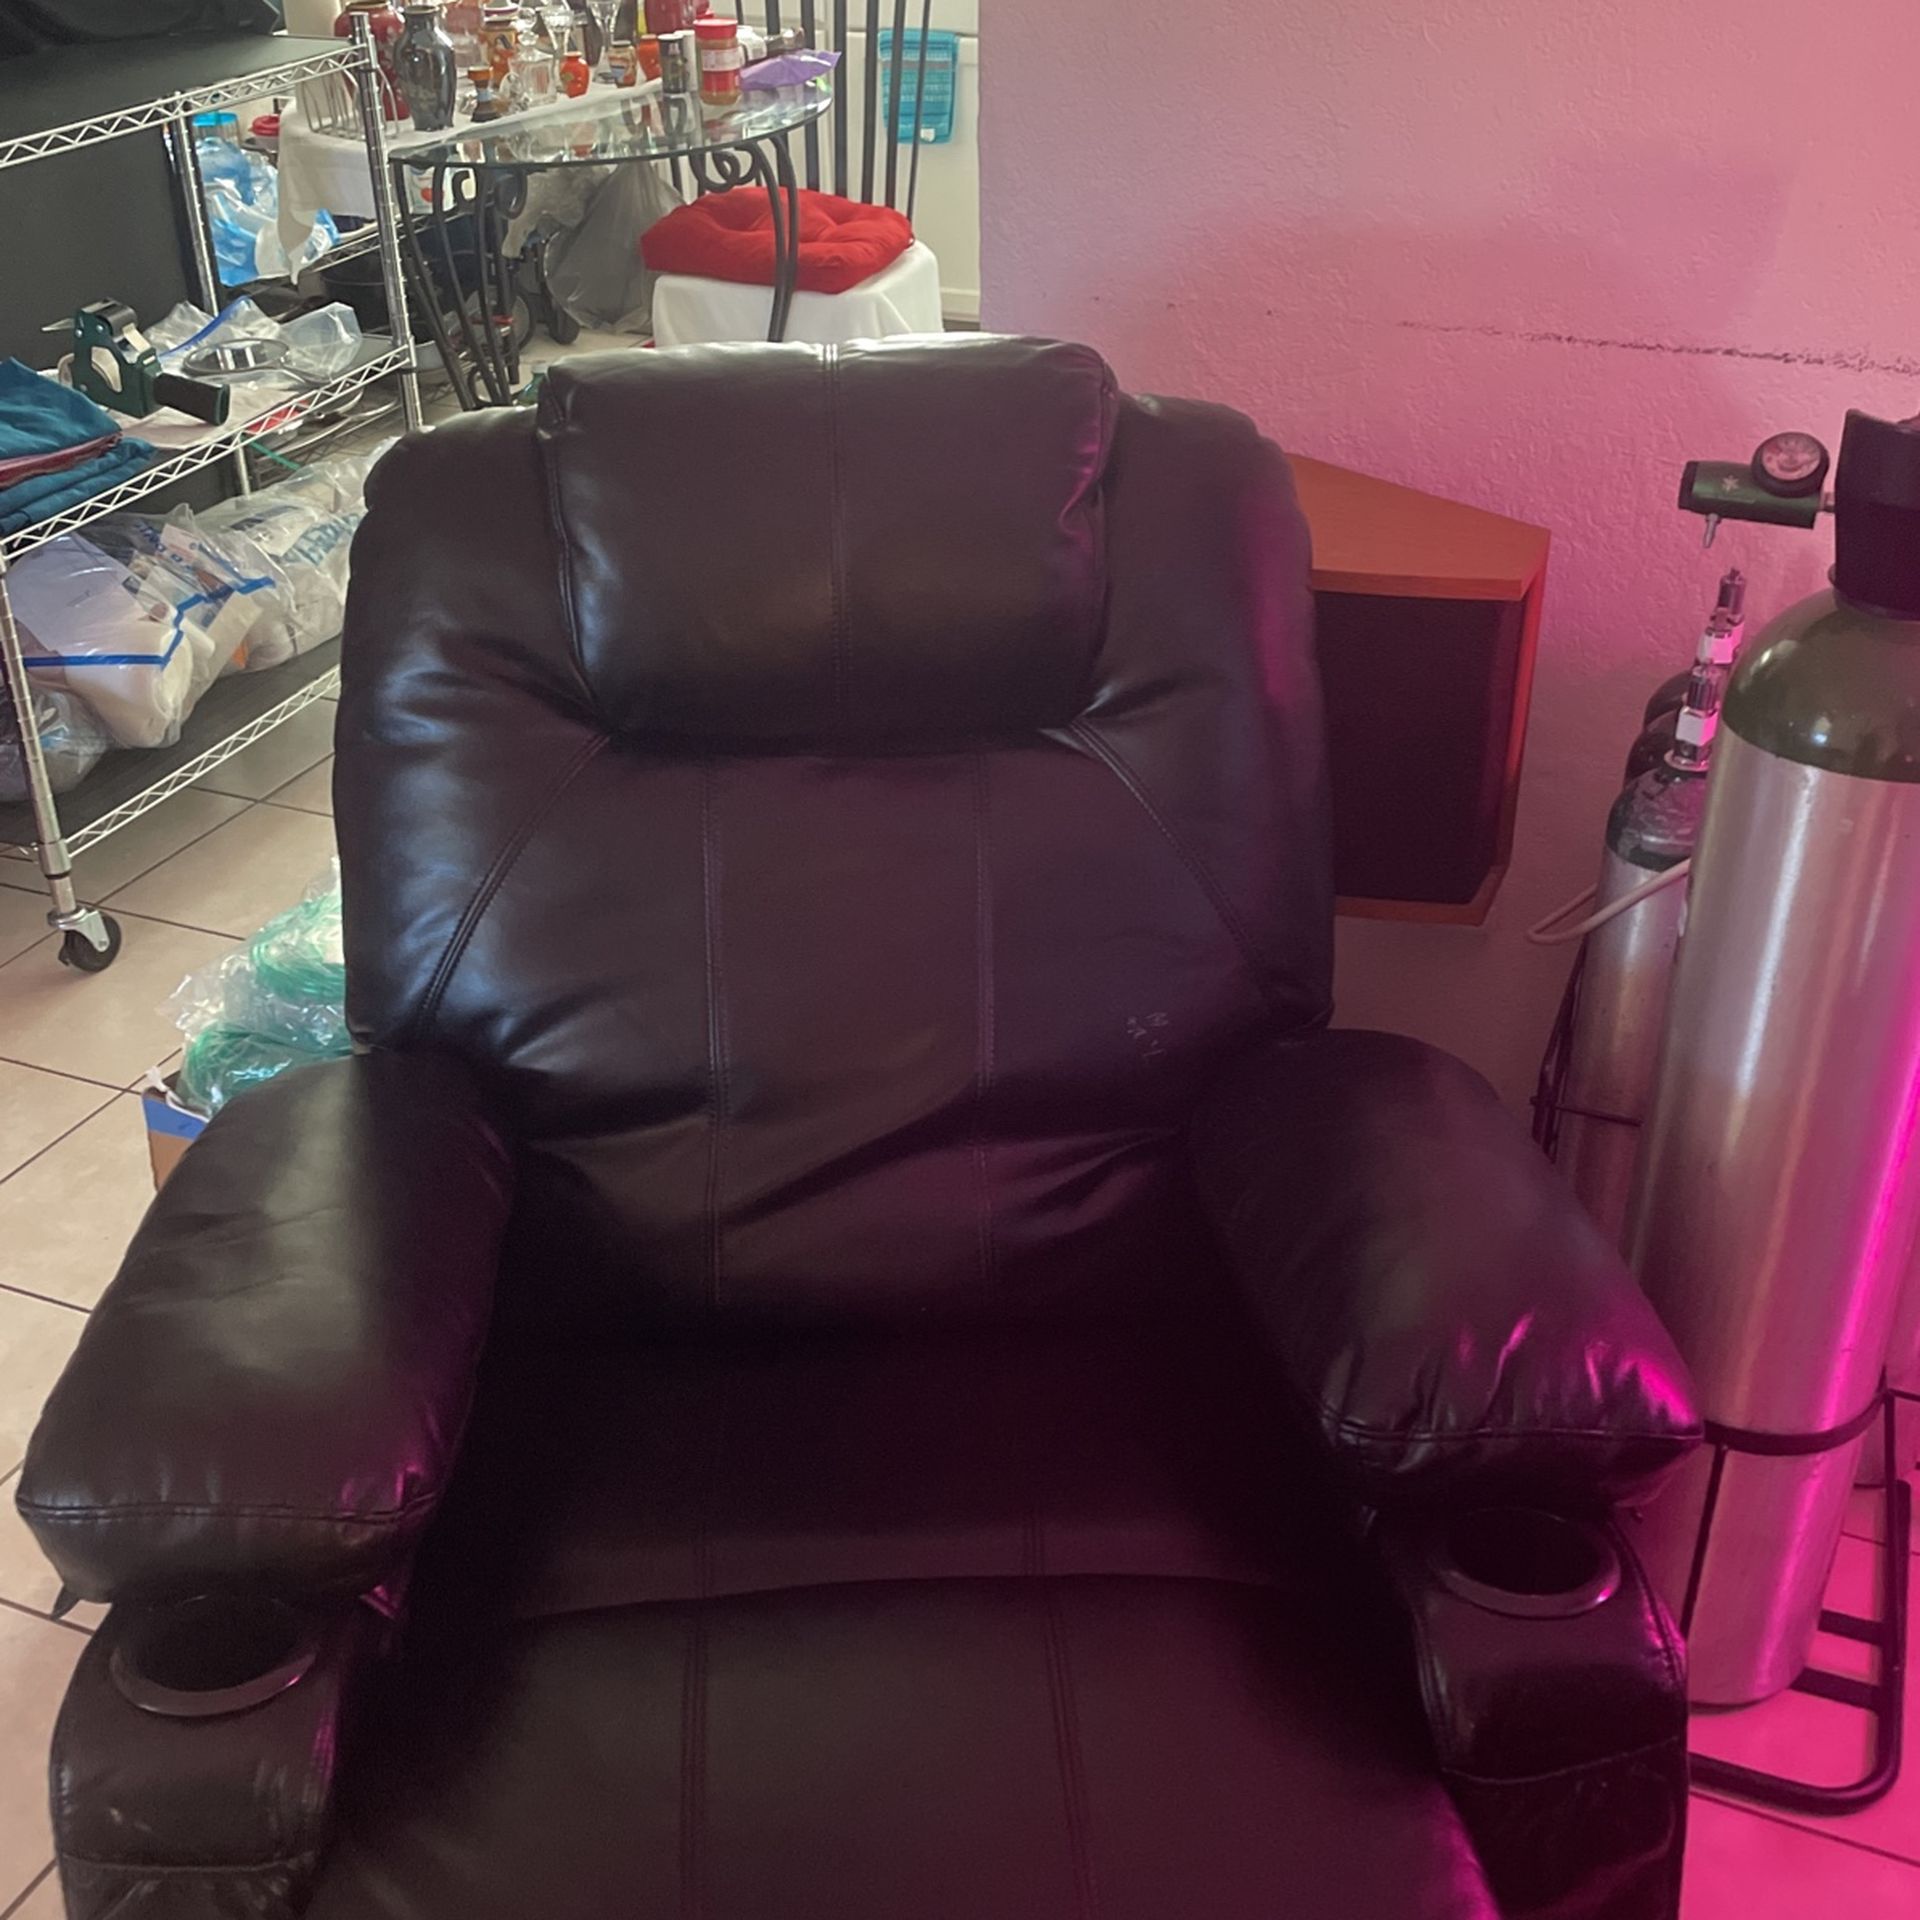 Swival, Rocker, Recliner, Electric MAssage In 8 Areas And Heat In 2 Points.